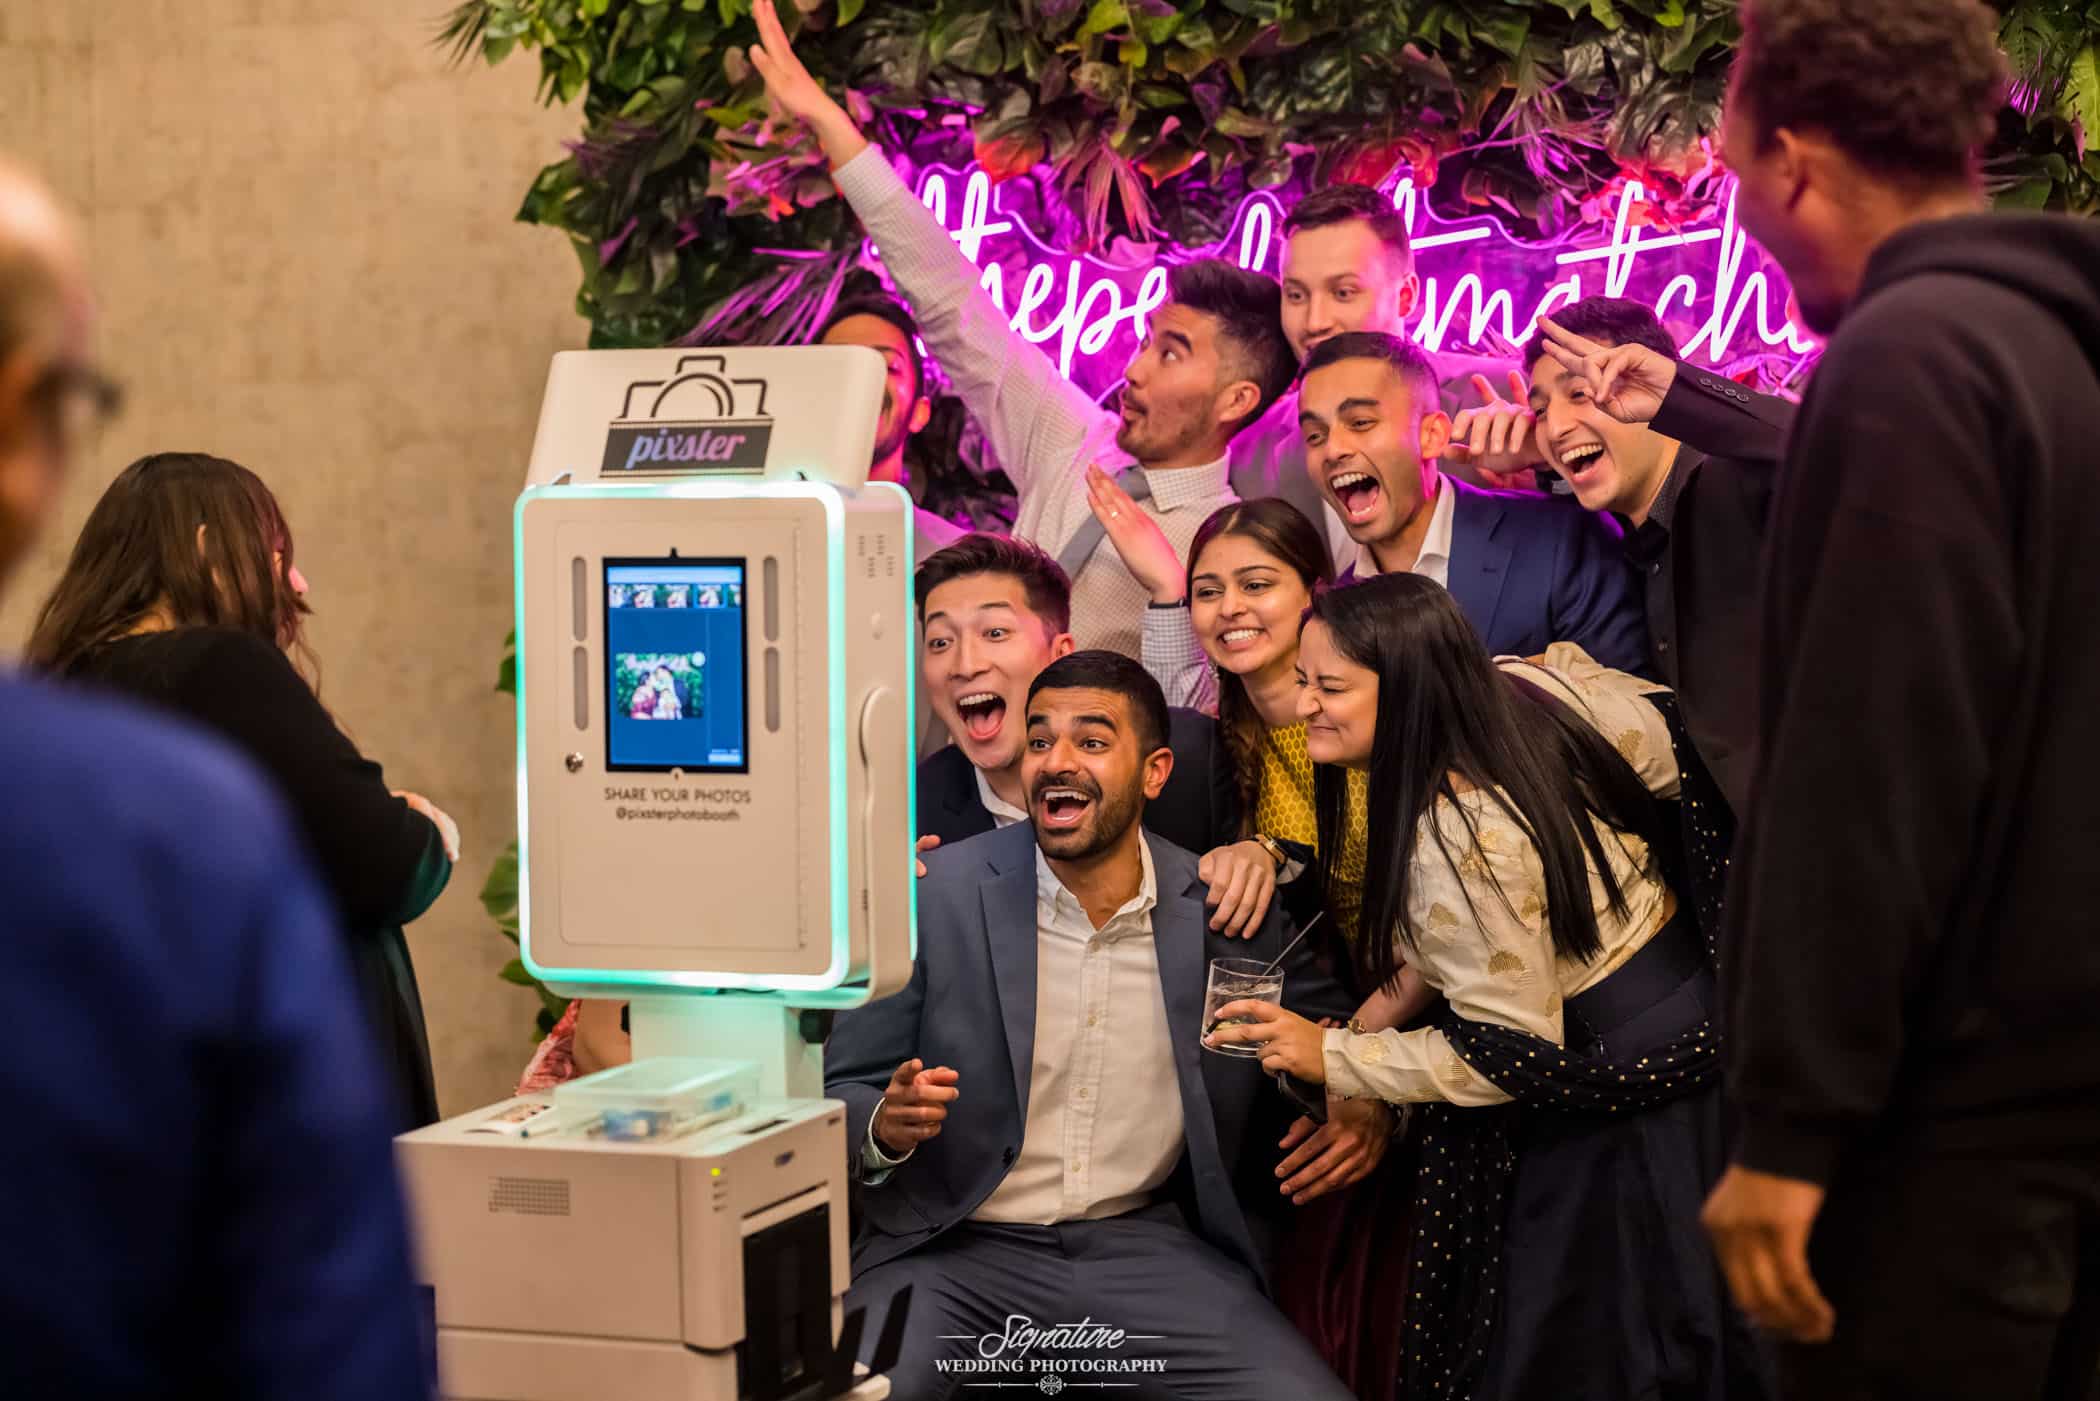 Group photo at photo booth